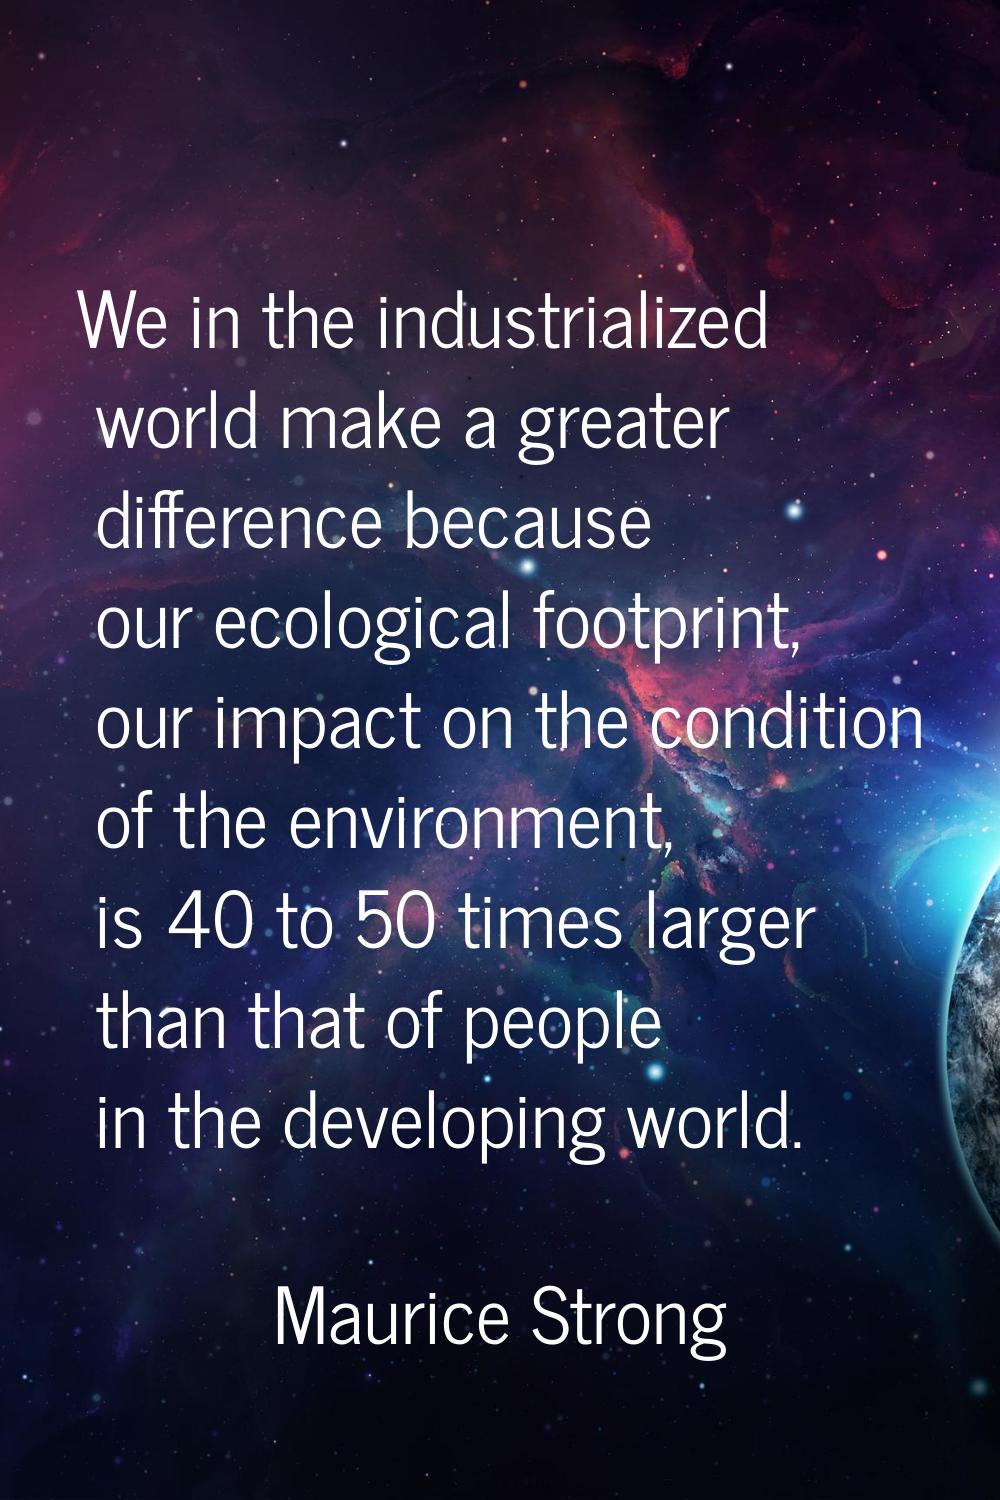 We in the industrialized world make a greater difference because our ecological footprint, our impa